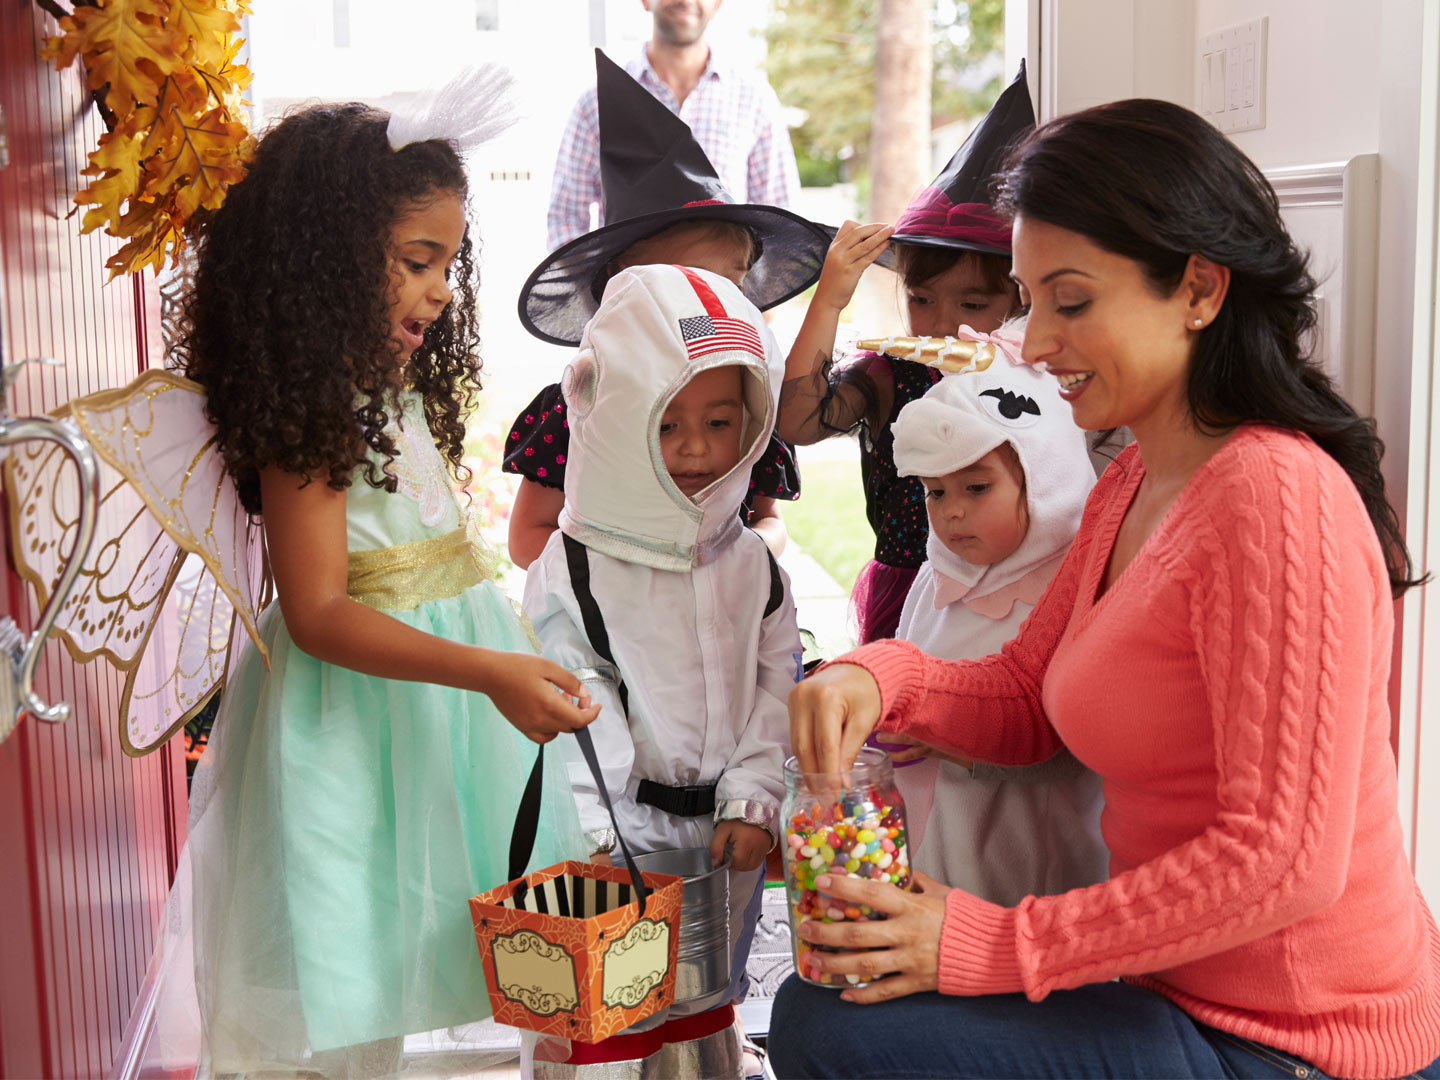 Halloween Candy - A Trick or a Treat? - Ask Dr. Weil